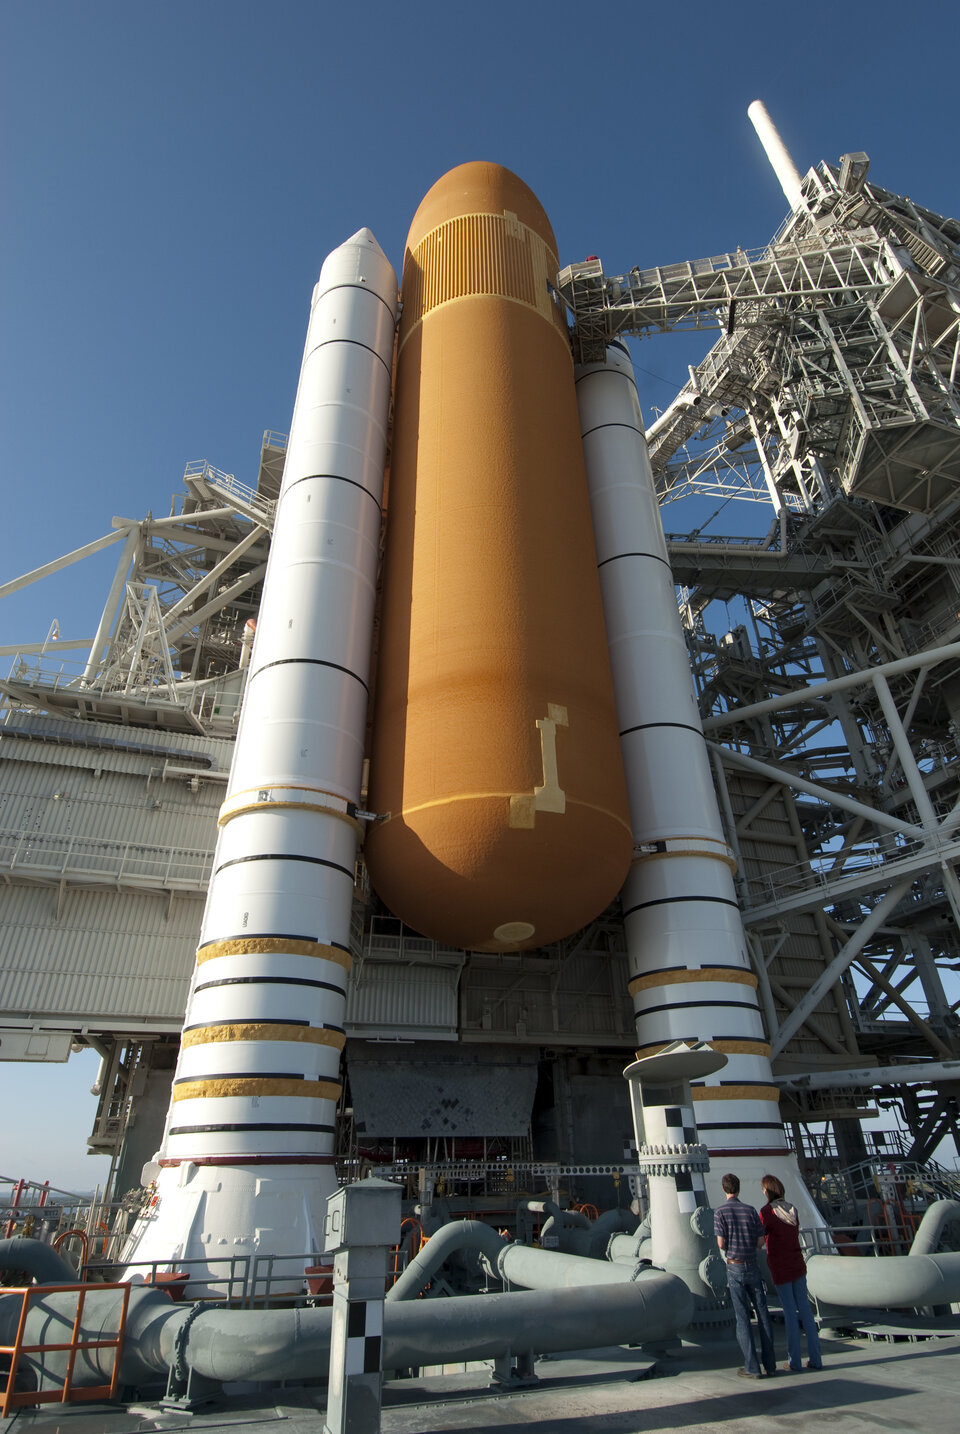 Endeavour on the Launch Pad 39A